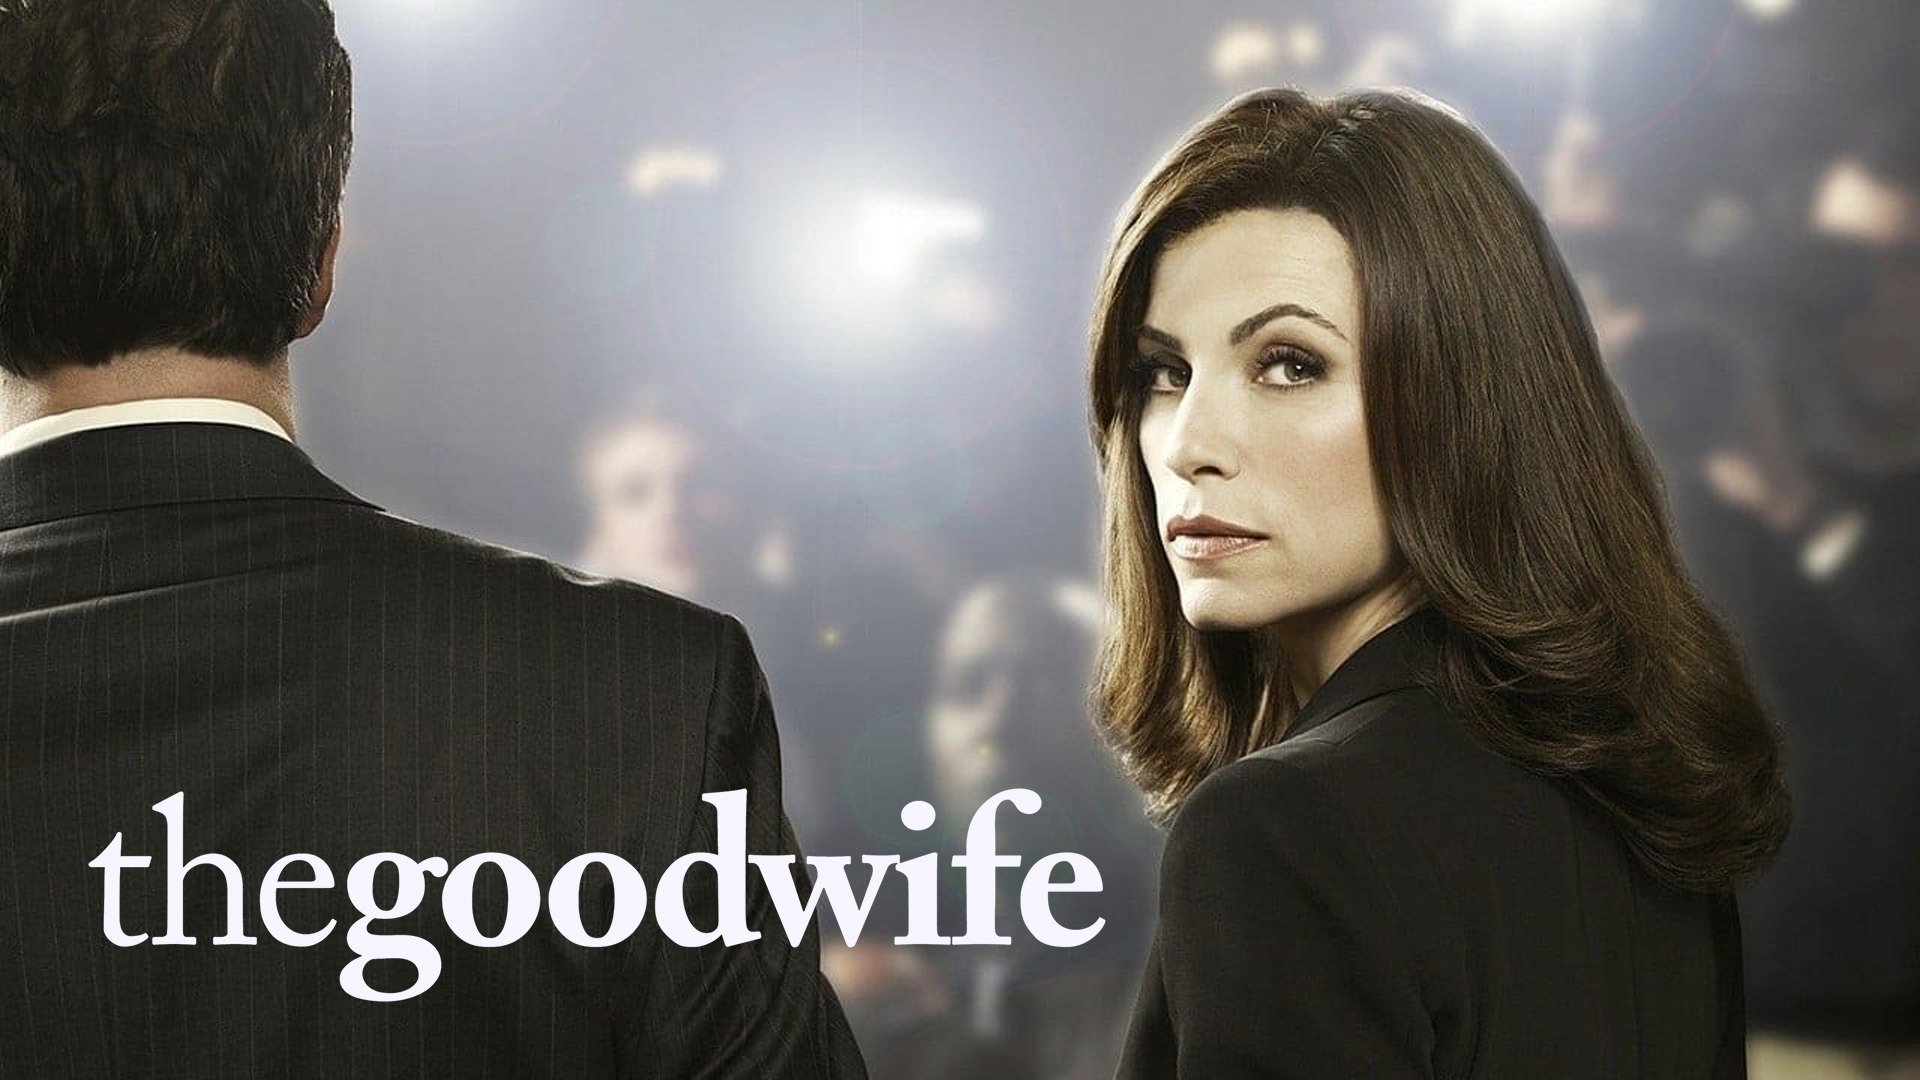 The Good Wife Season 1, Episode 9 Sex Image Hq